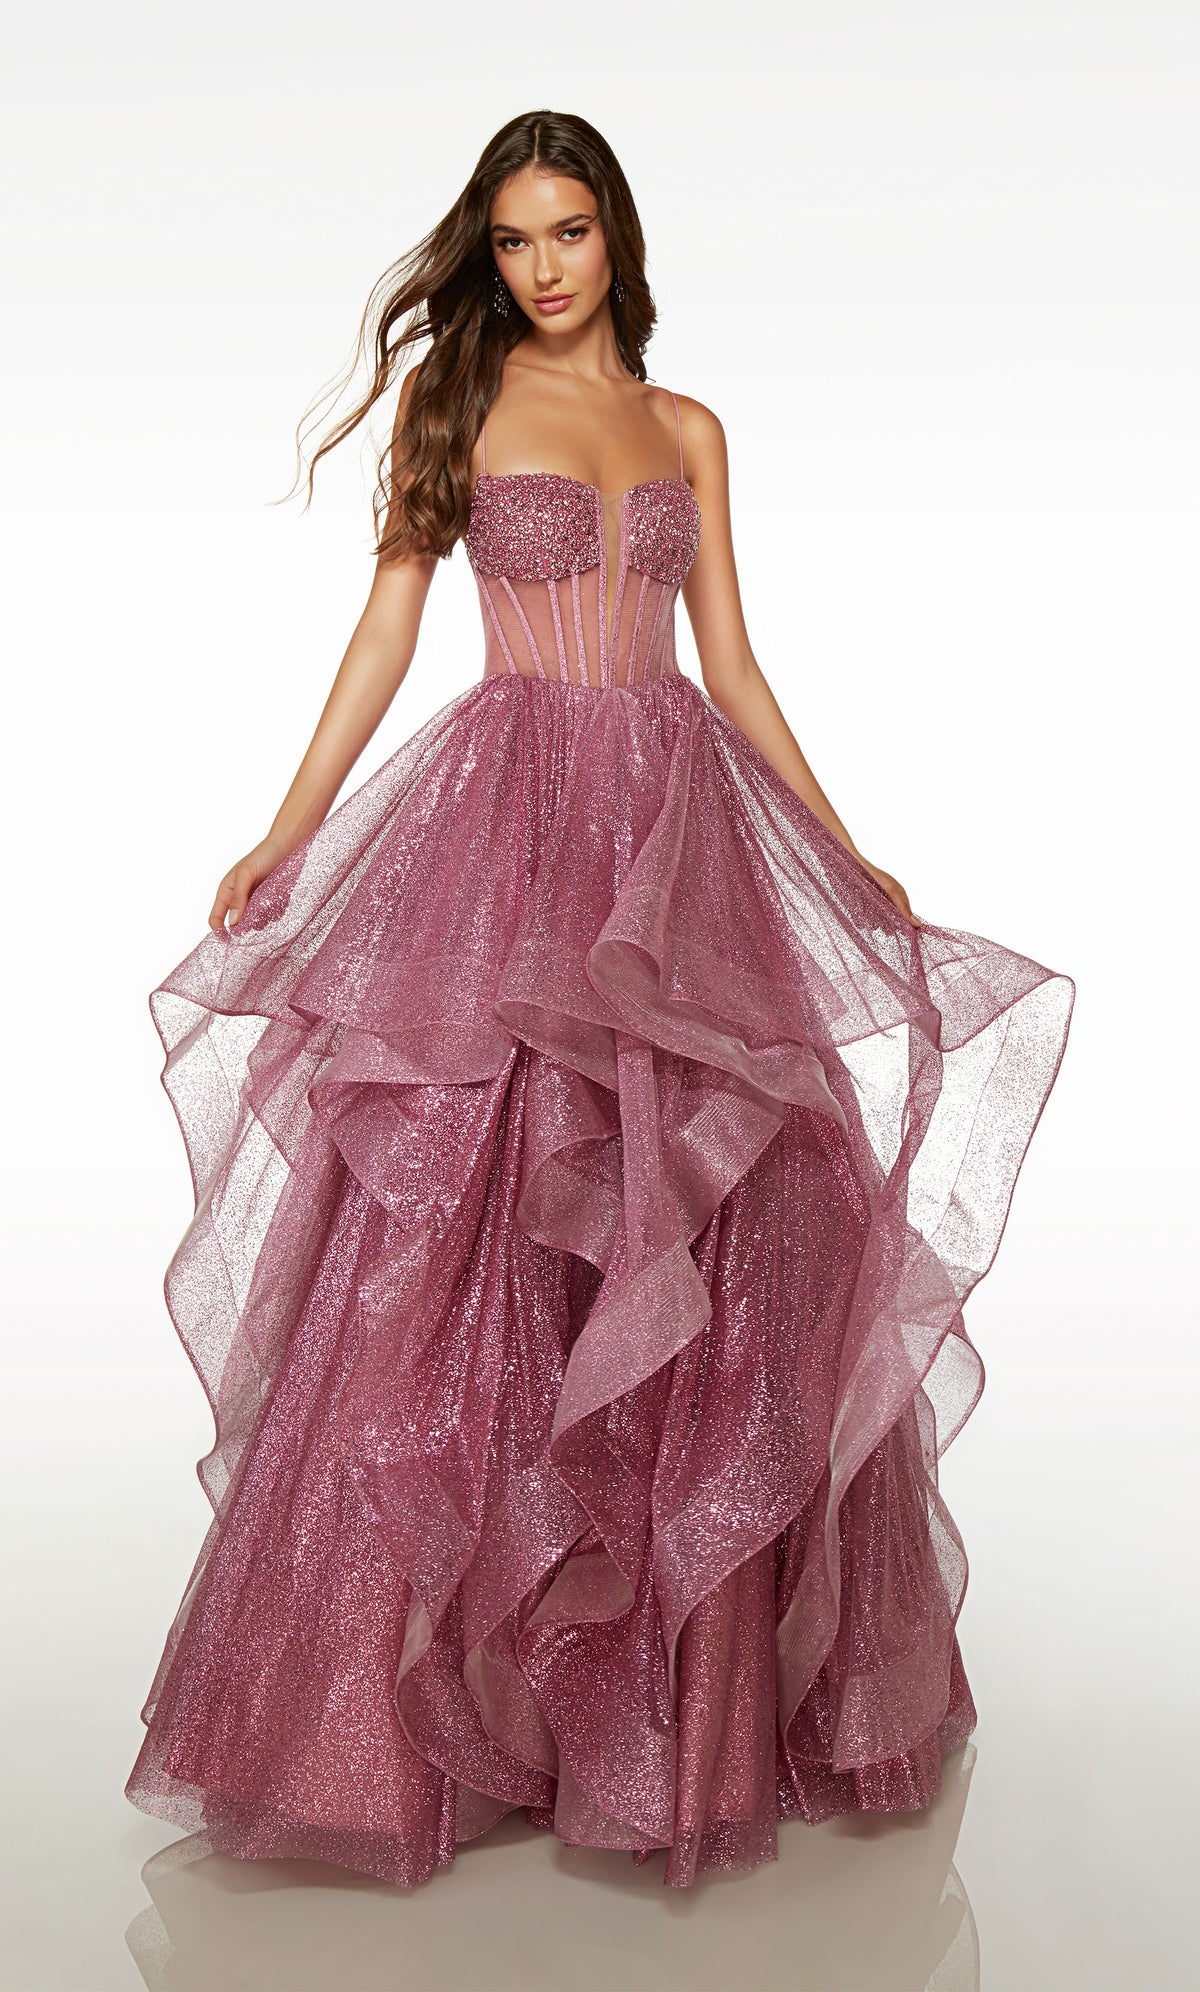 Elegant pink corset ball gown with an hand-beaded sheer bodice and an ruffled skirt in glitter tulle fabric for an glamorous and enchanting look.